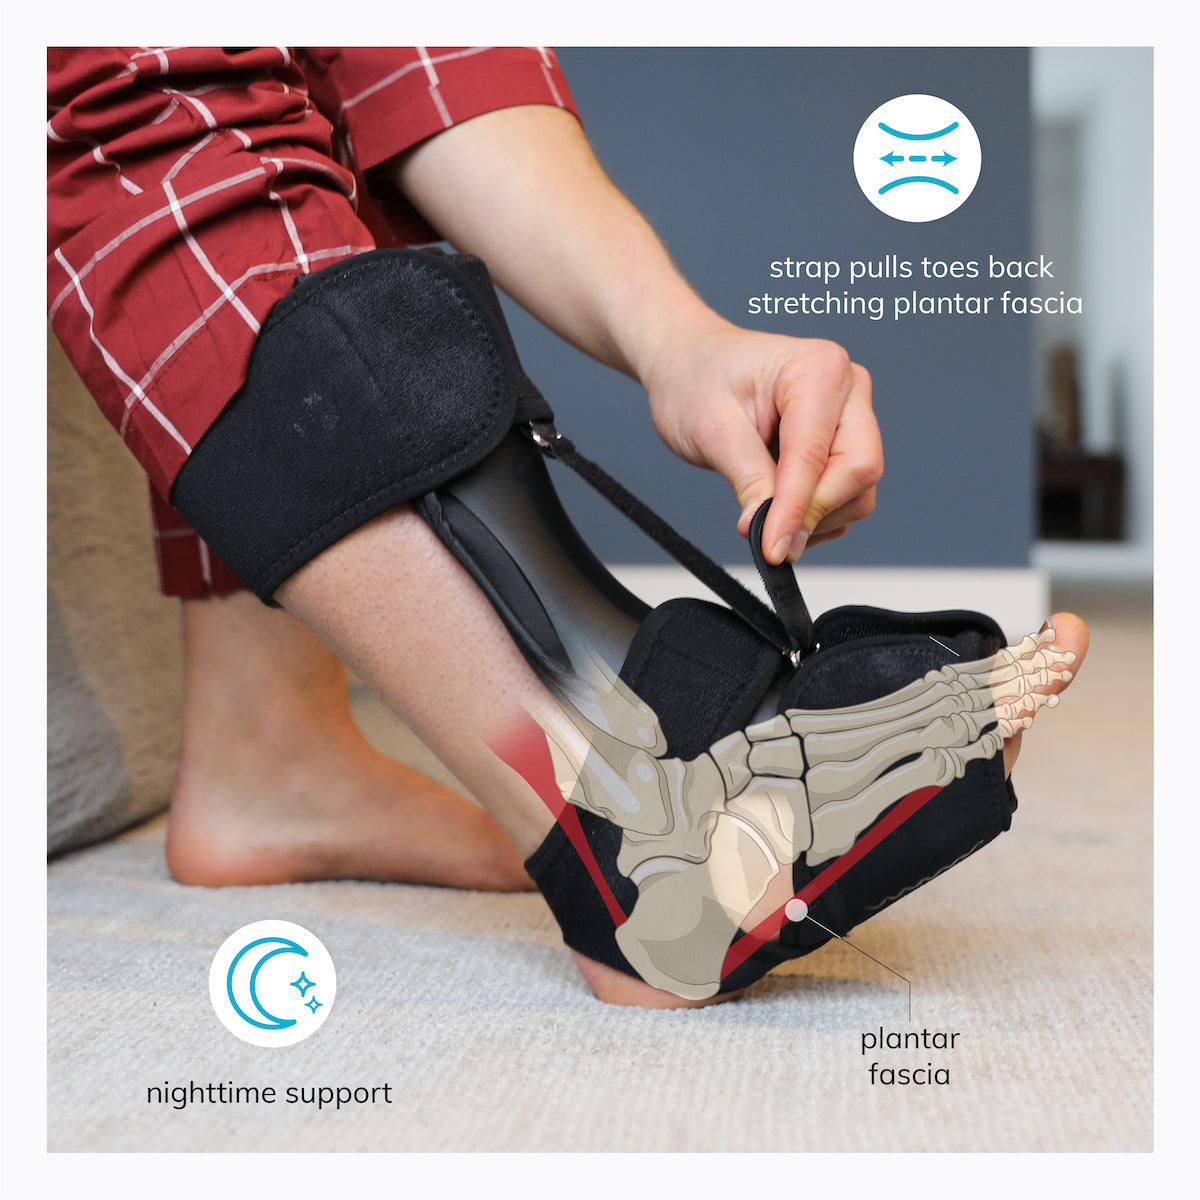 the dorsal night splint stretches the plantar fascia for nighttime heel pain relief